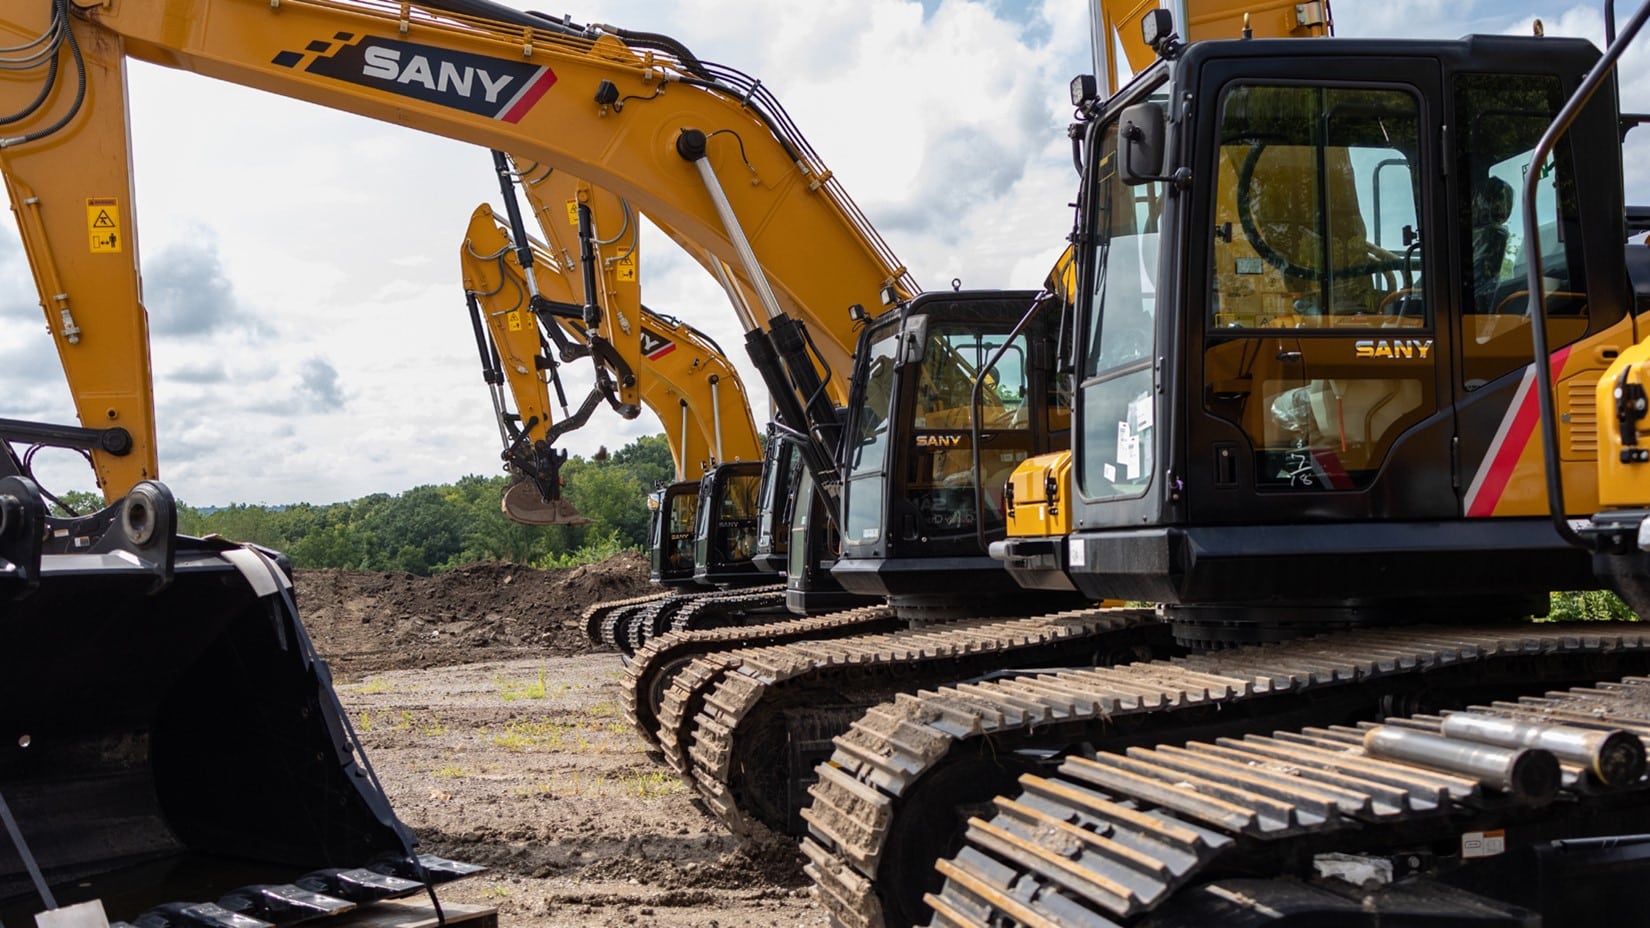 9 Amazing Reasons to Buy a New Excavator from a Construction Equipment Dealer in Kansas City